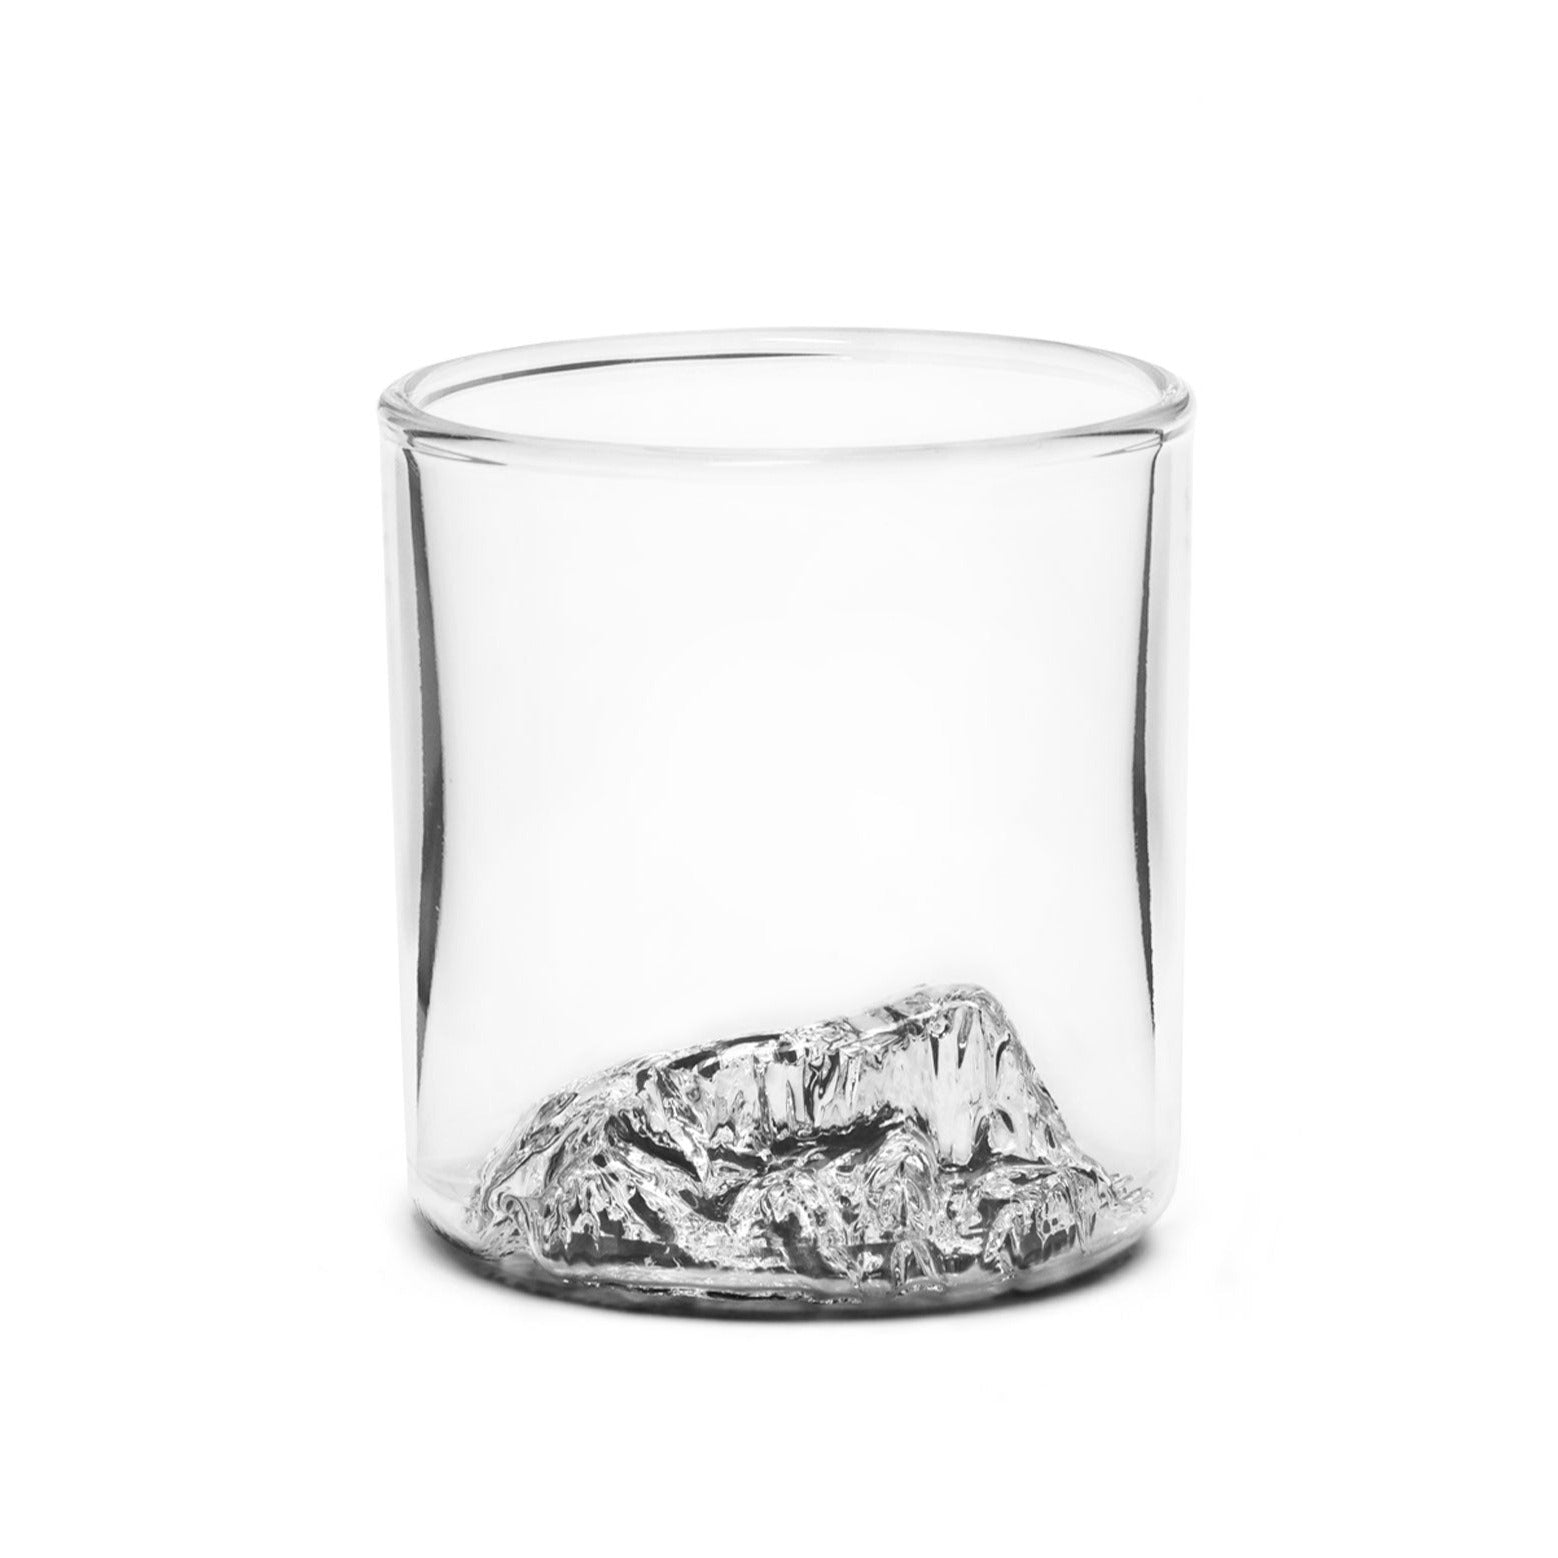 Whiskey of The American West Tumblers | North Drinkware